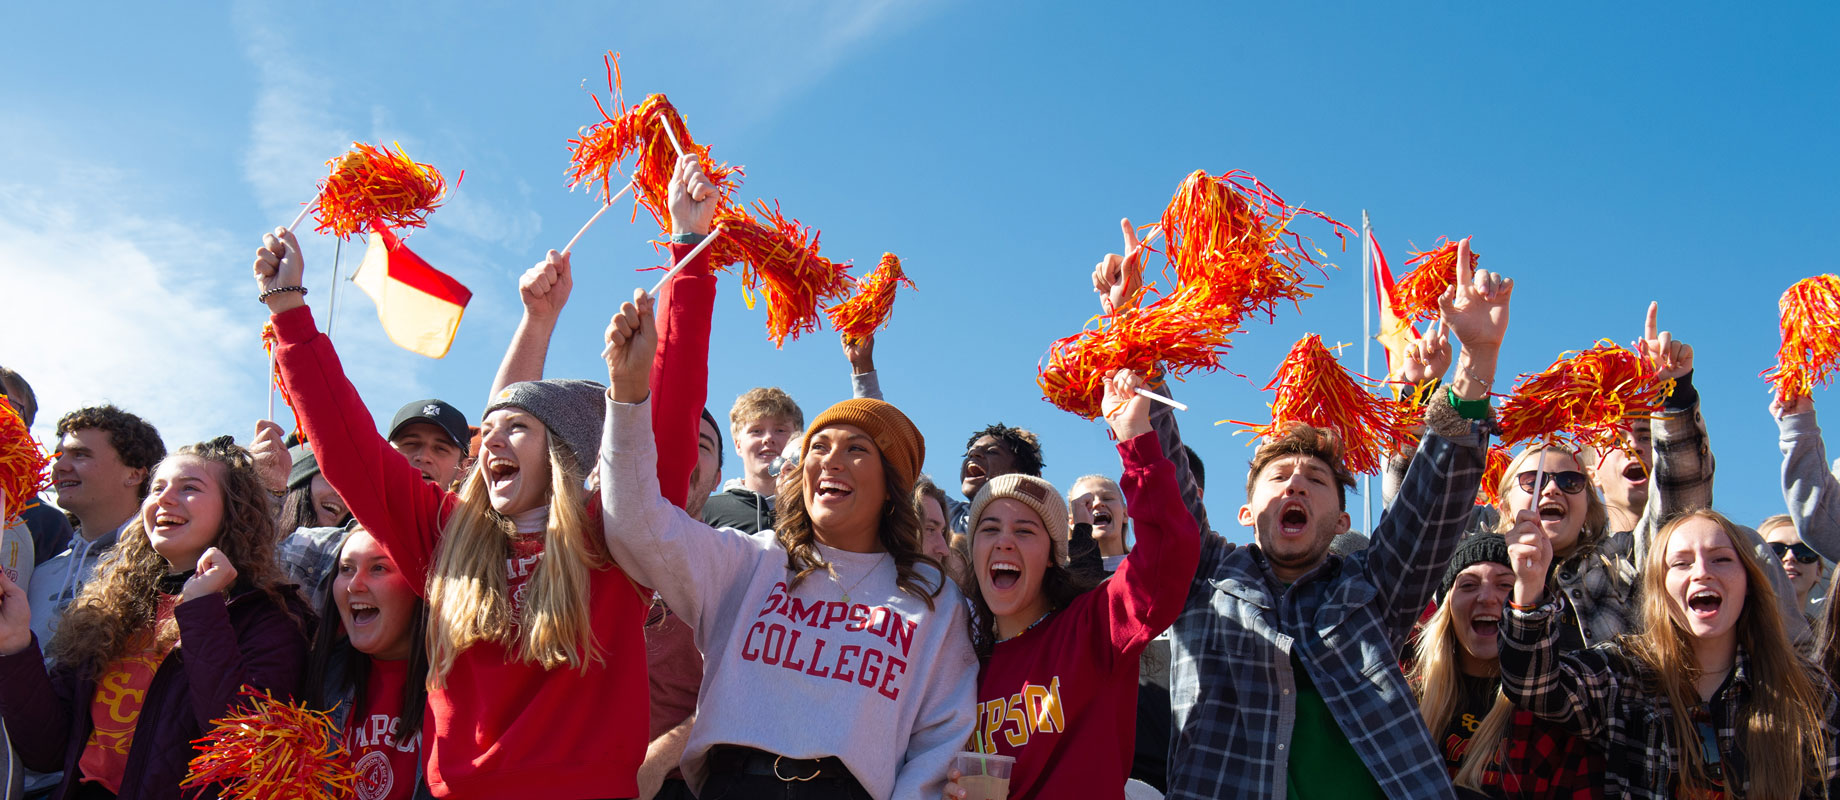 Crowd of students at the Simpson College homecoming football game.